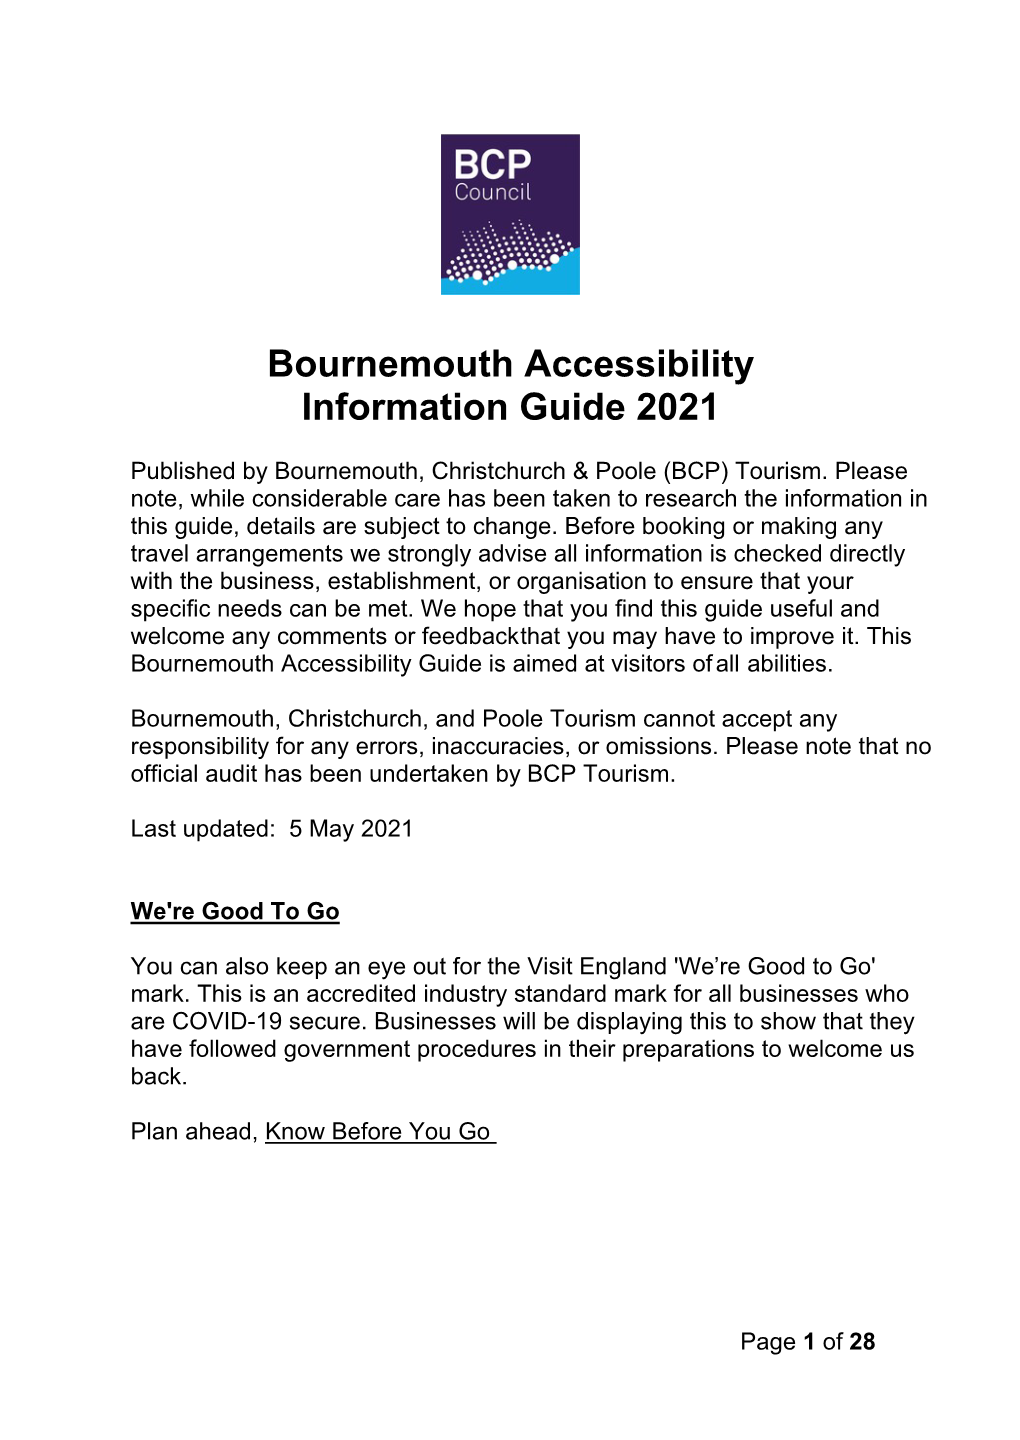 Bournemouth Accessibility Information Guide 2021